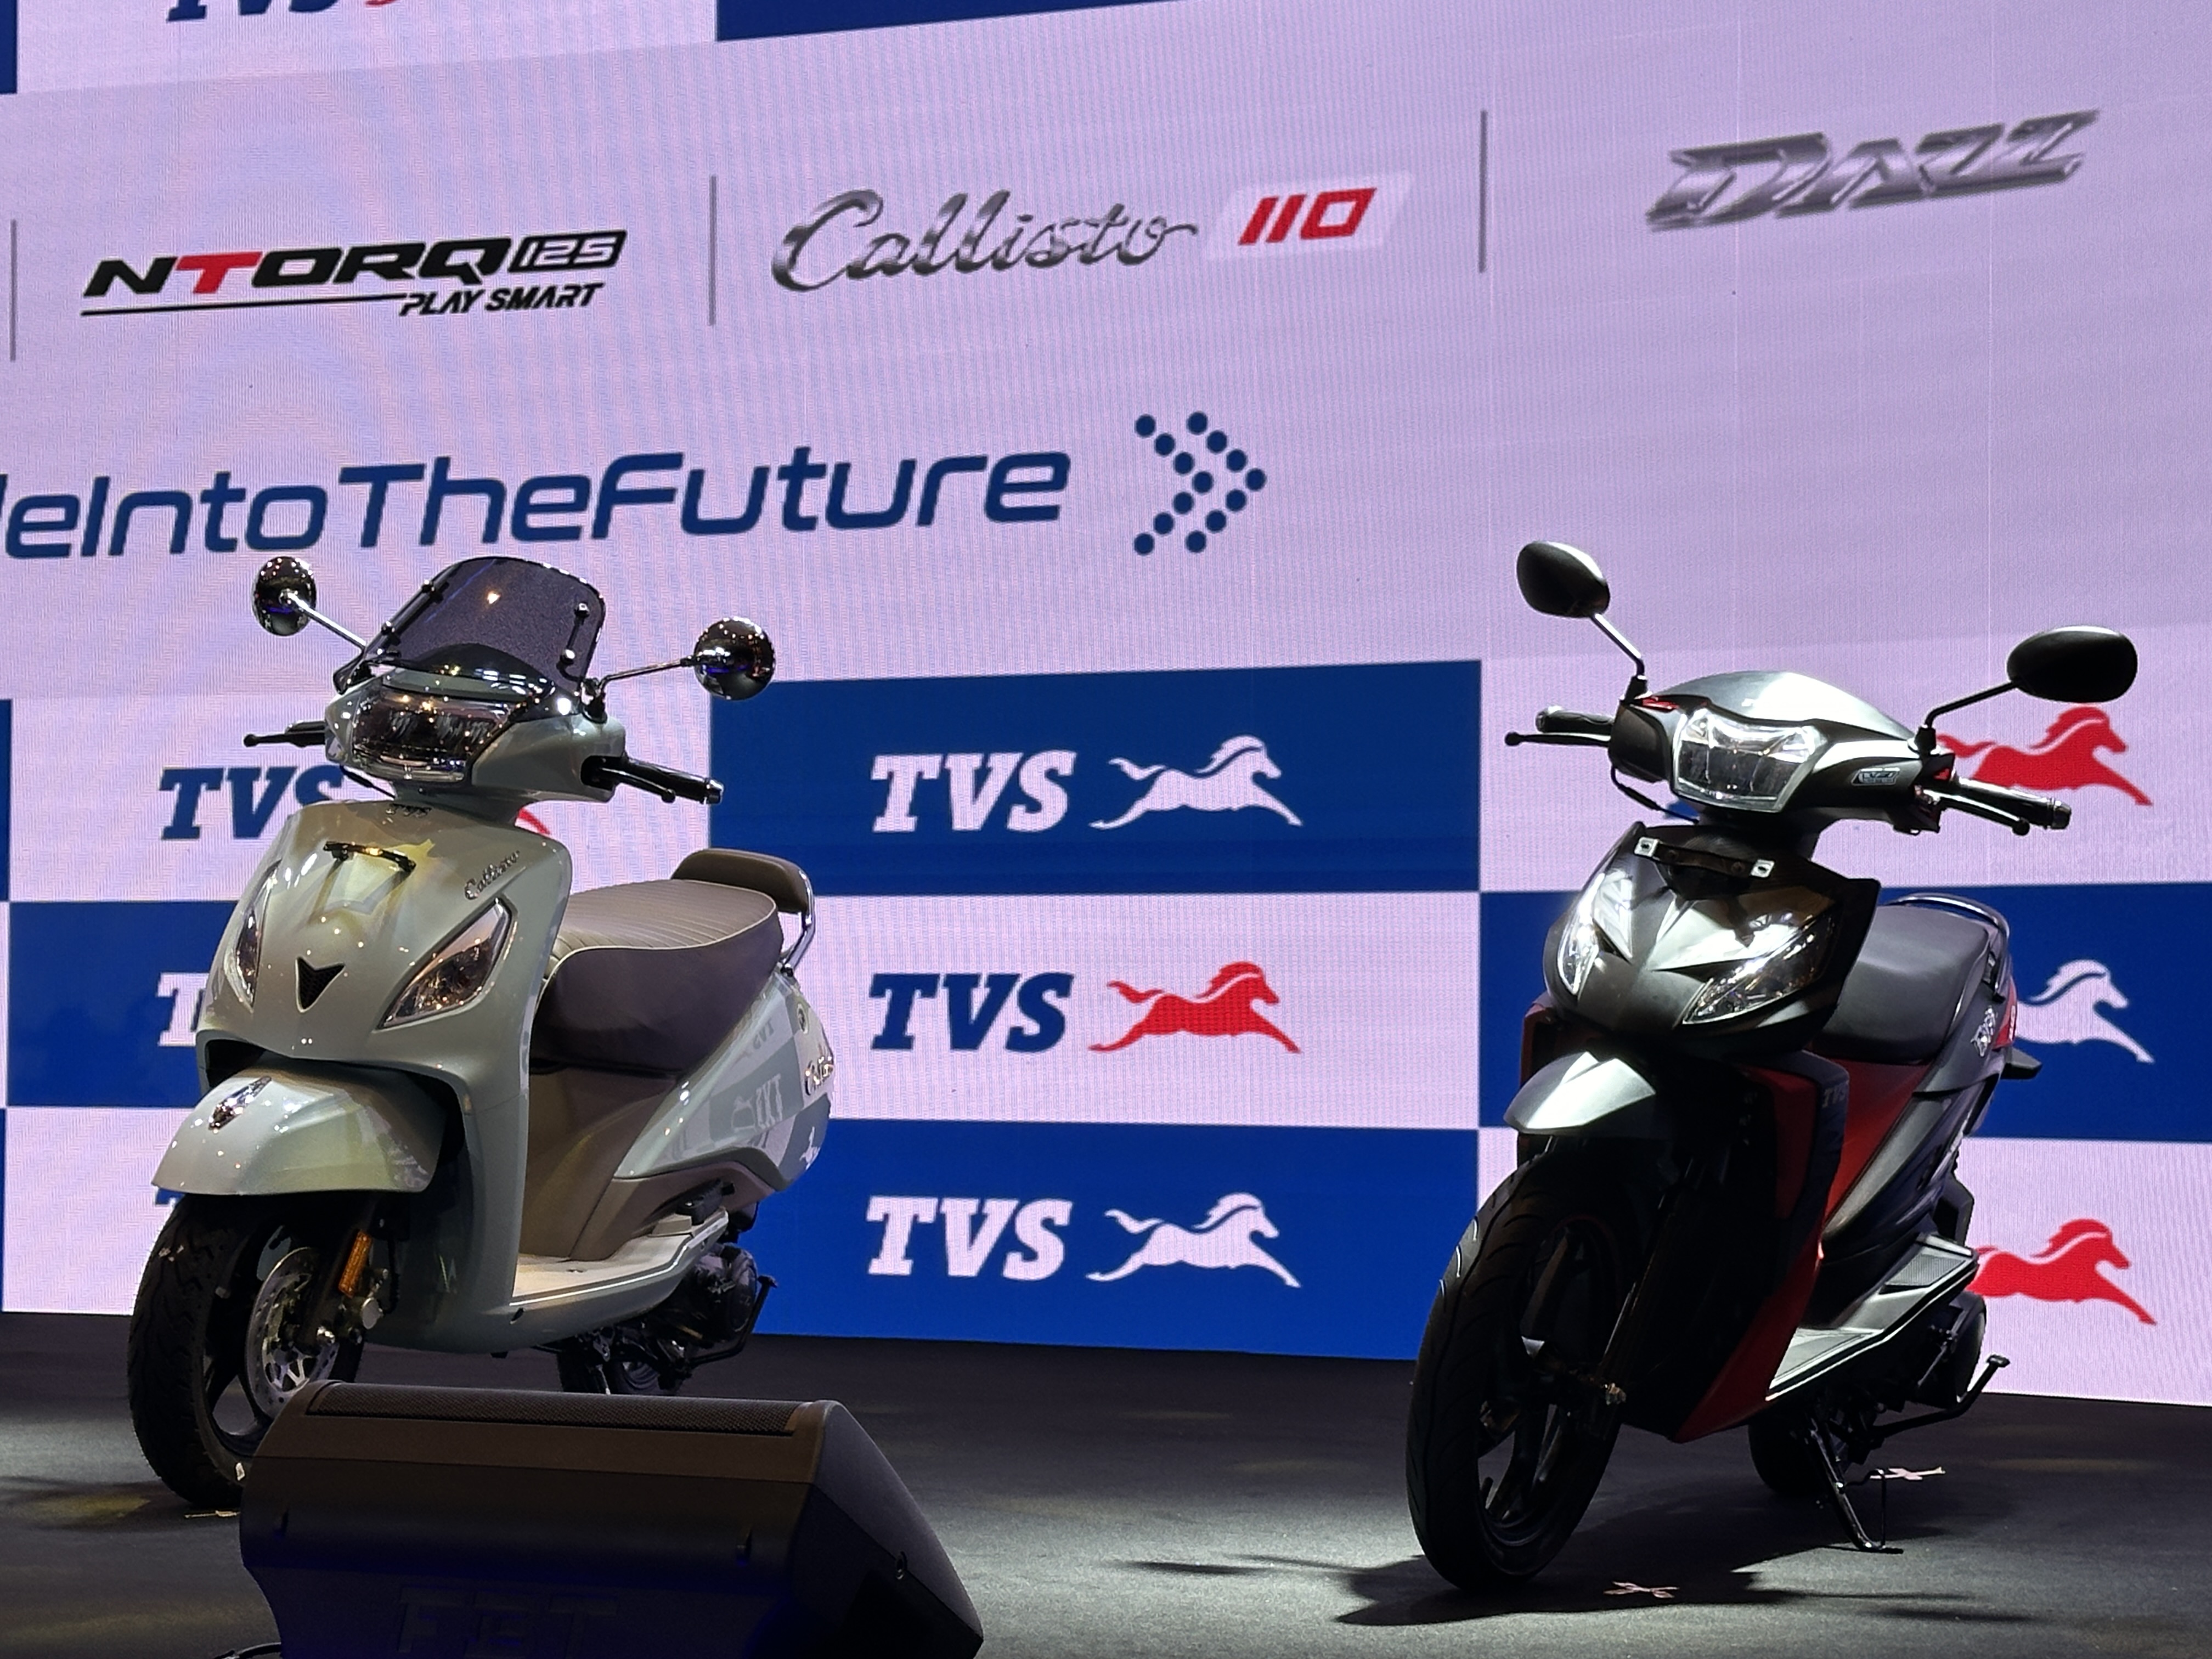 TVS - Indian motorcycles enter the Vietnamese market with 5 models from 110 to 125cc TVS Motor 2.JPG